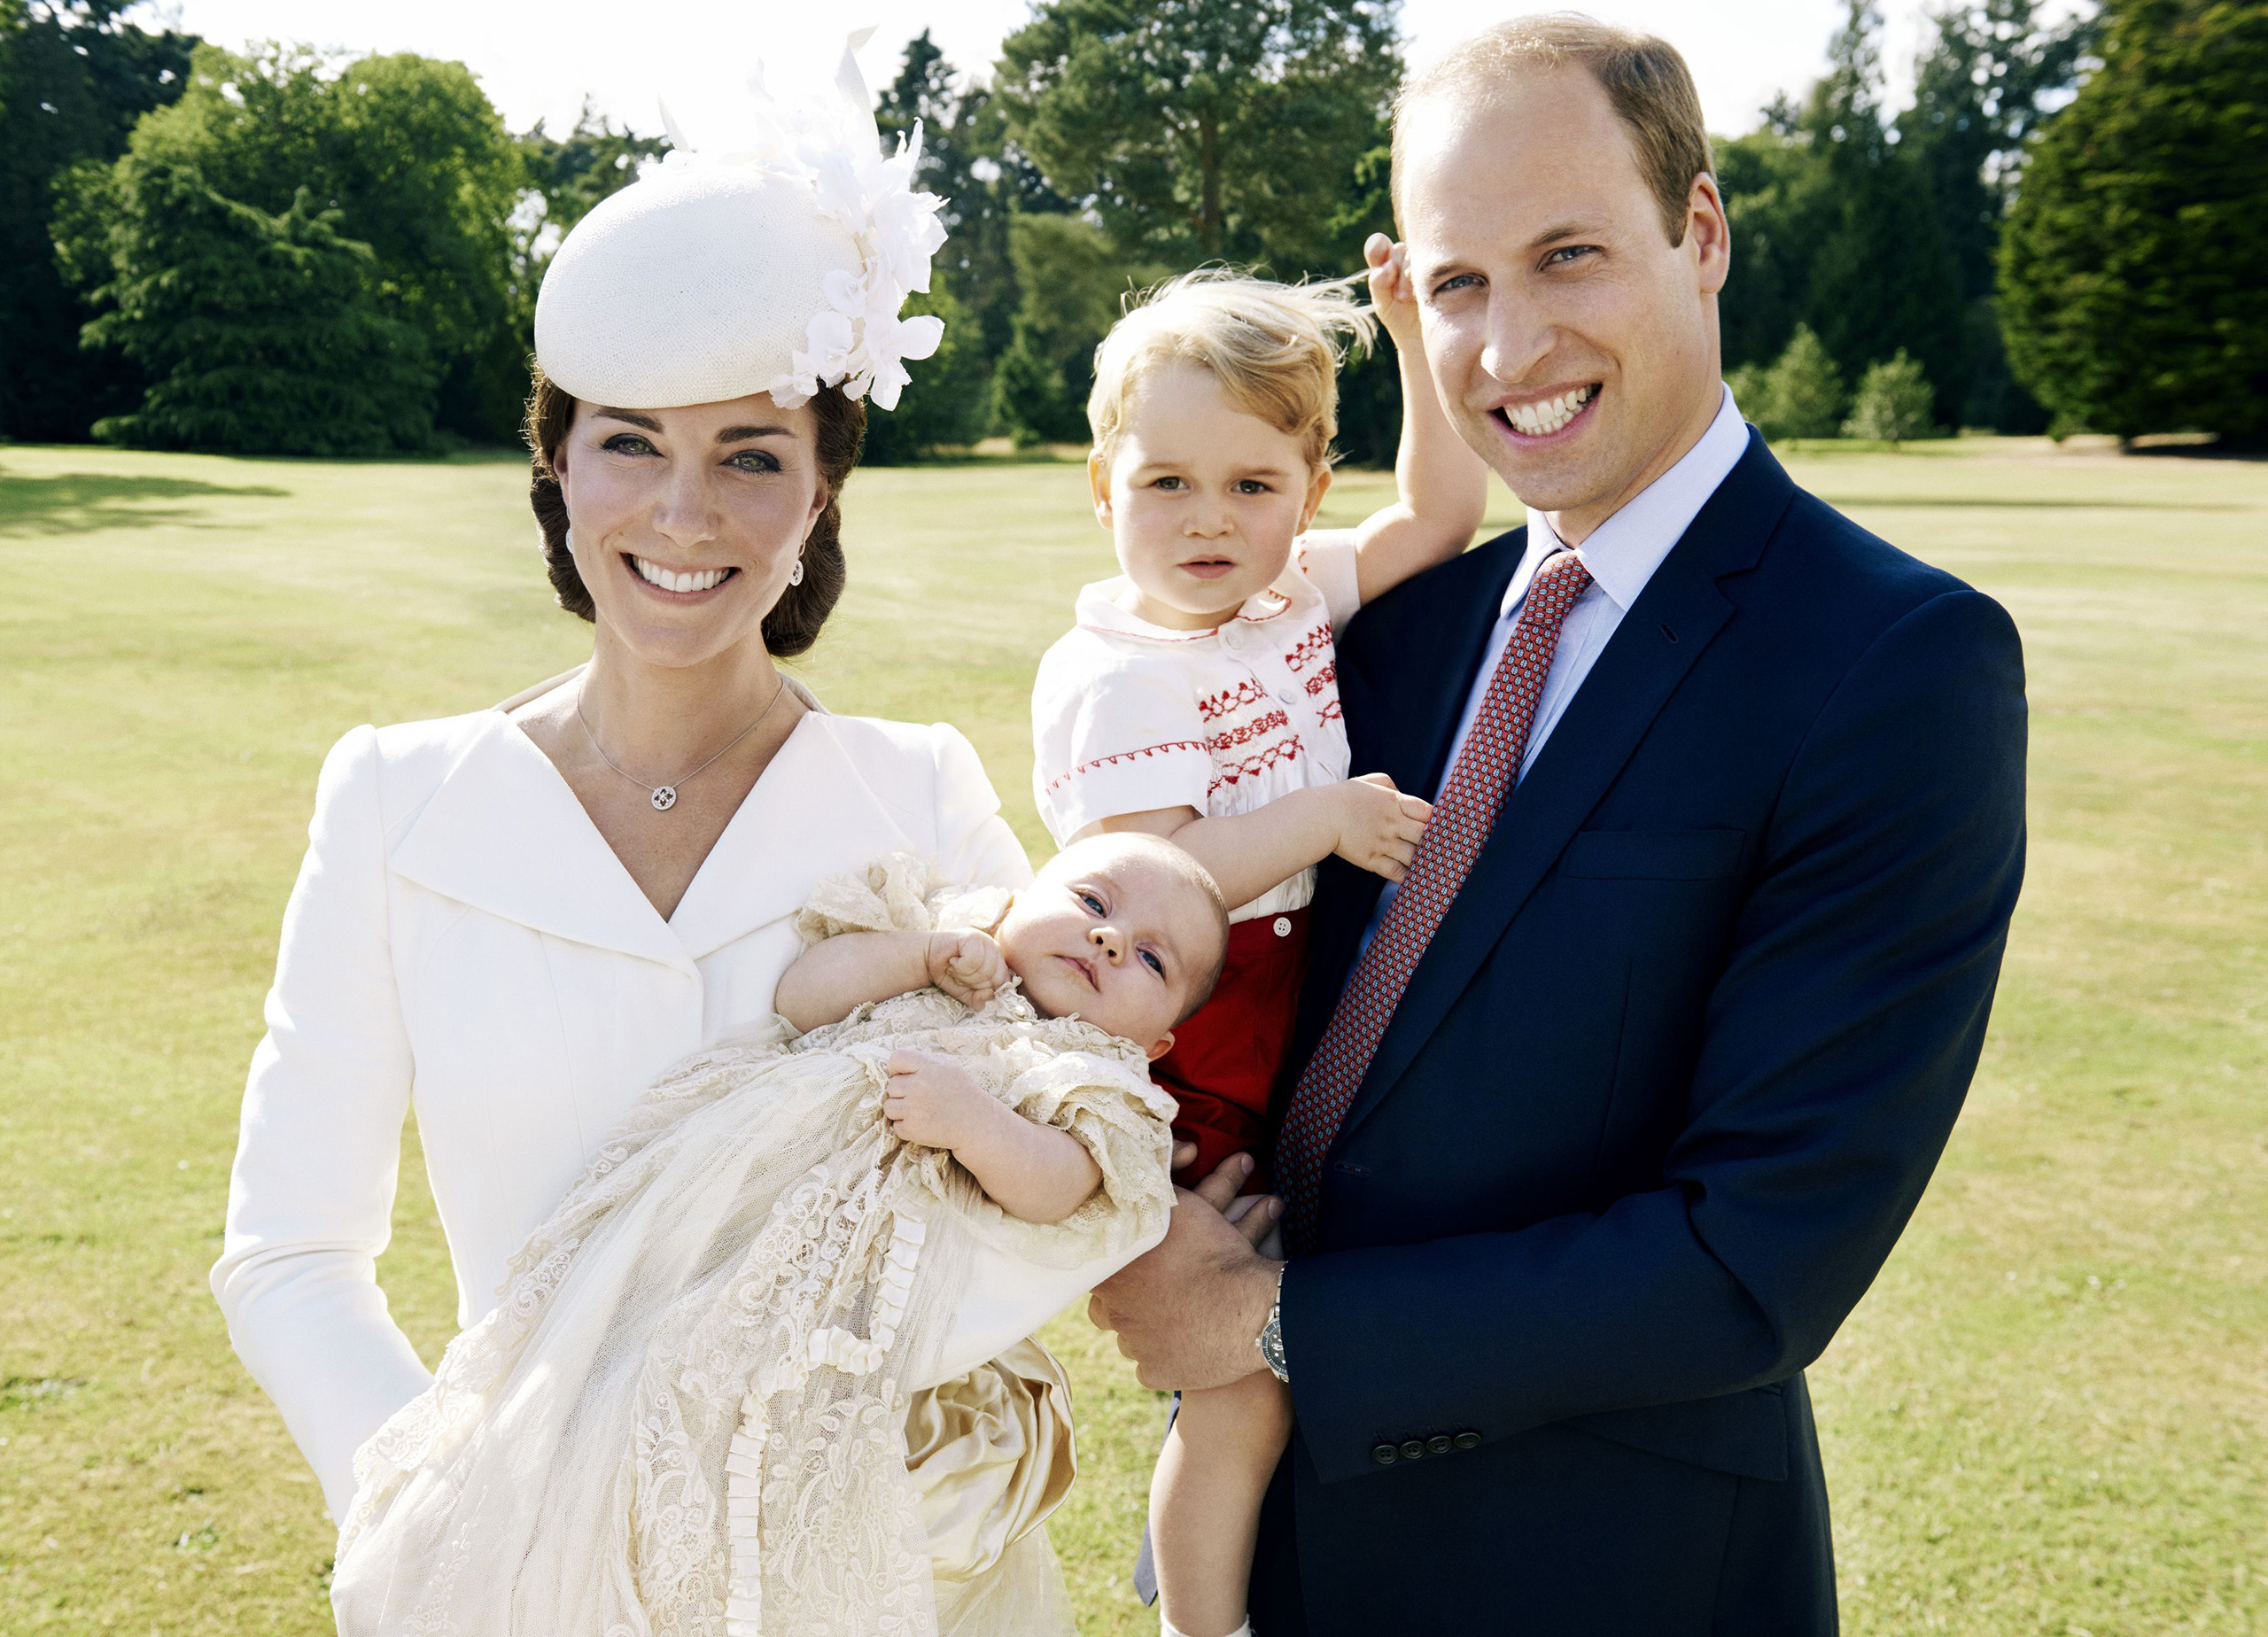 The Duke and Duchess of Cambridge and their children, Princess Charlotte and Prince George, May 7, 2015.